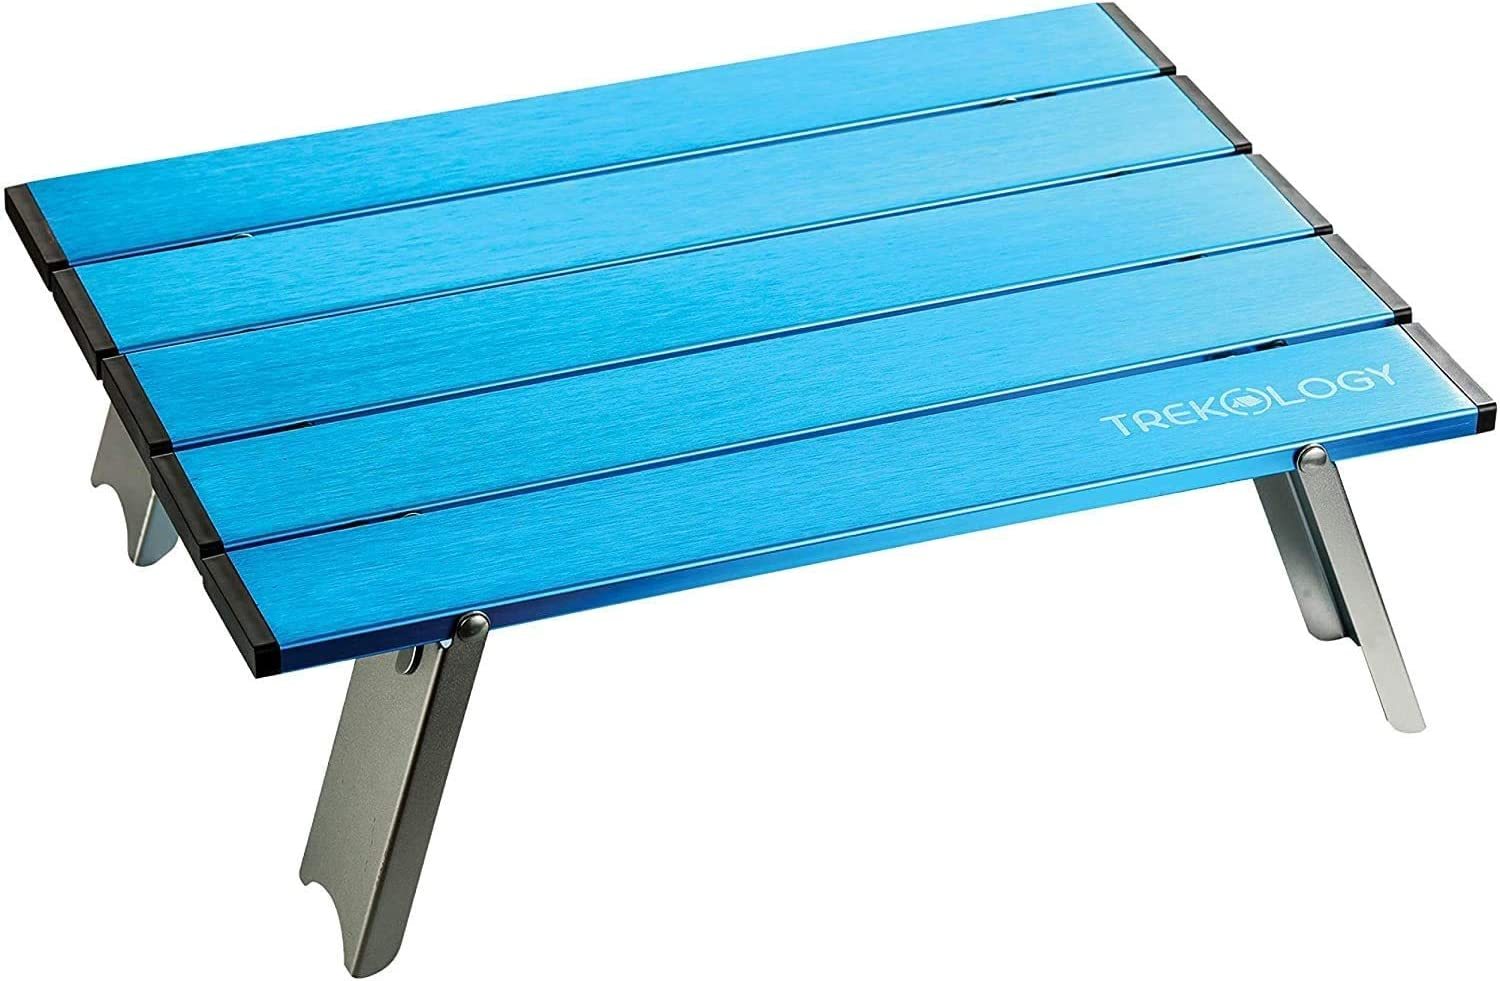 Primary image for Small Camping Table, Folding Camping Tables, Portable Beach Table, Aluminum